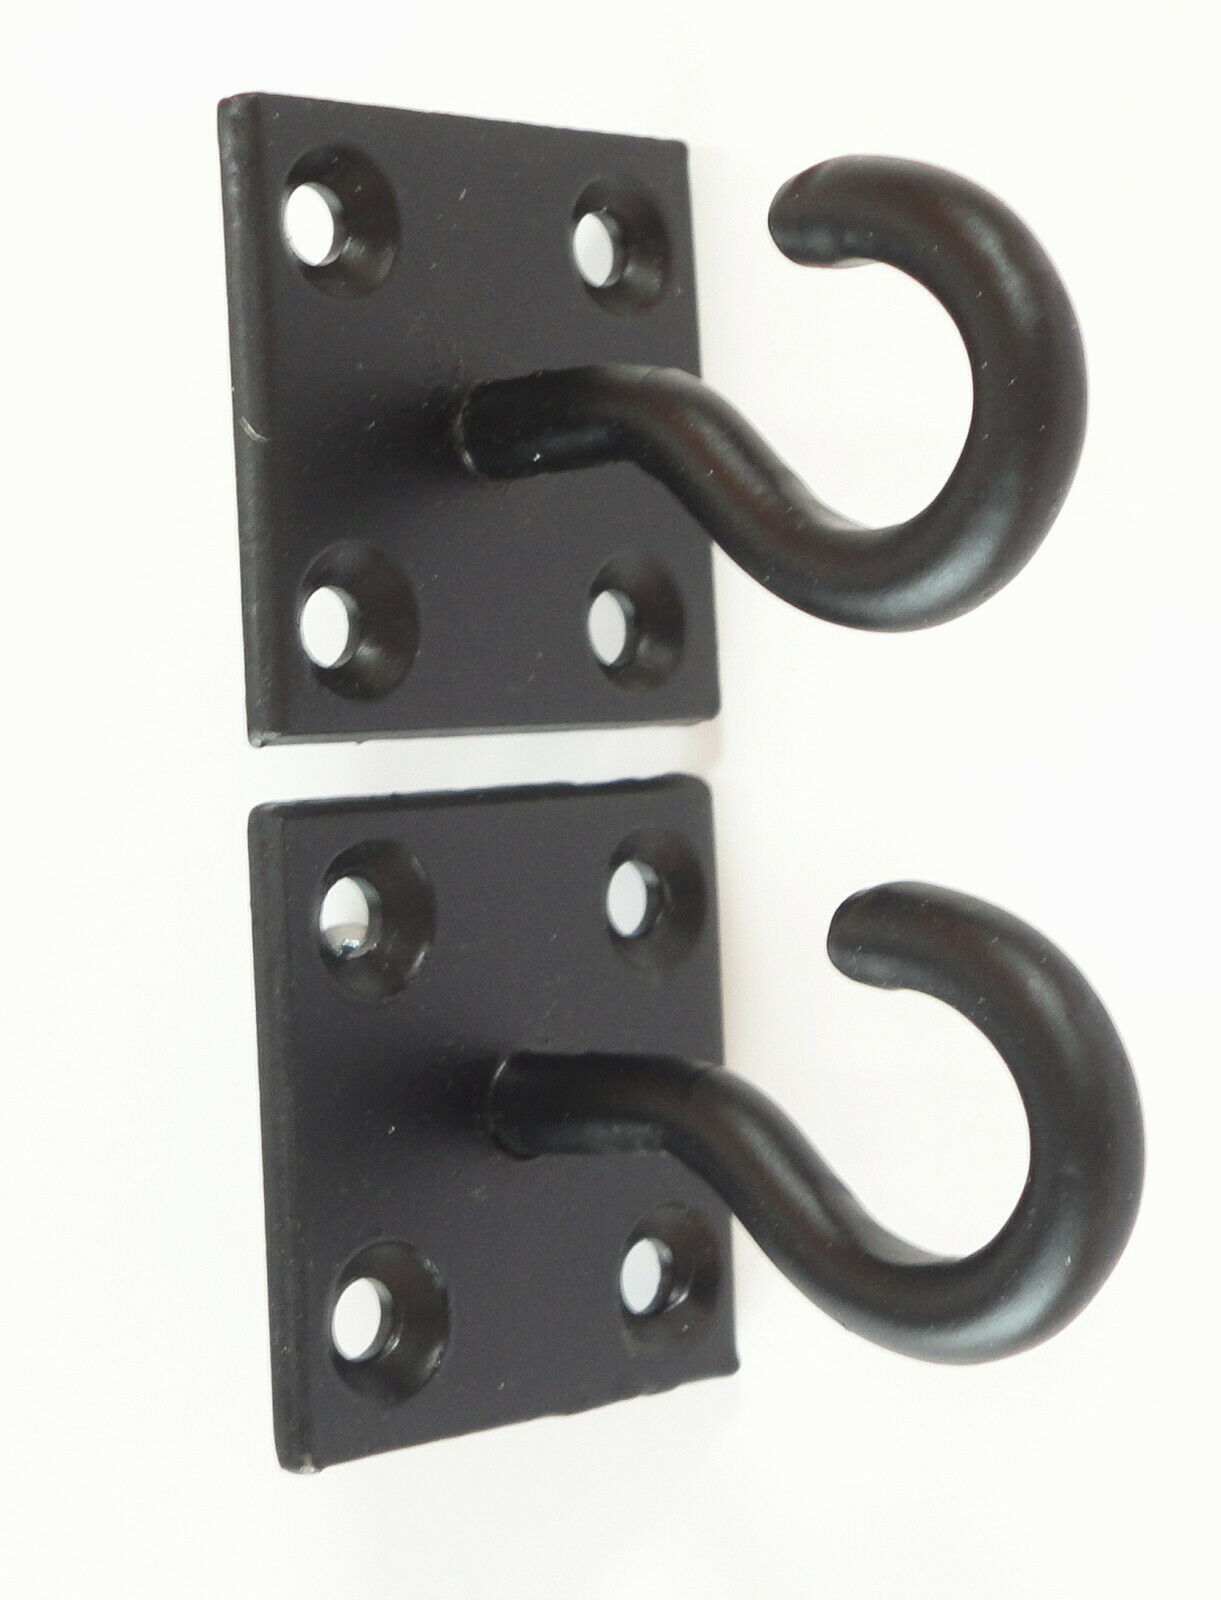 Rustic Unique Shelf Brackets x 2 Hanging Hook on Ring / Chain Black Floating